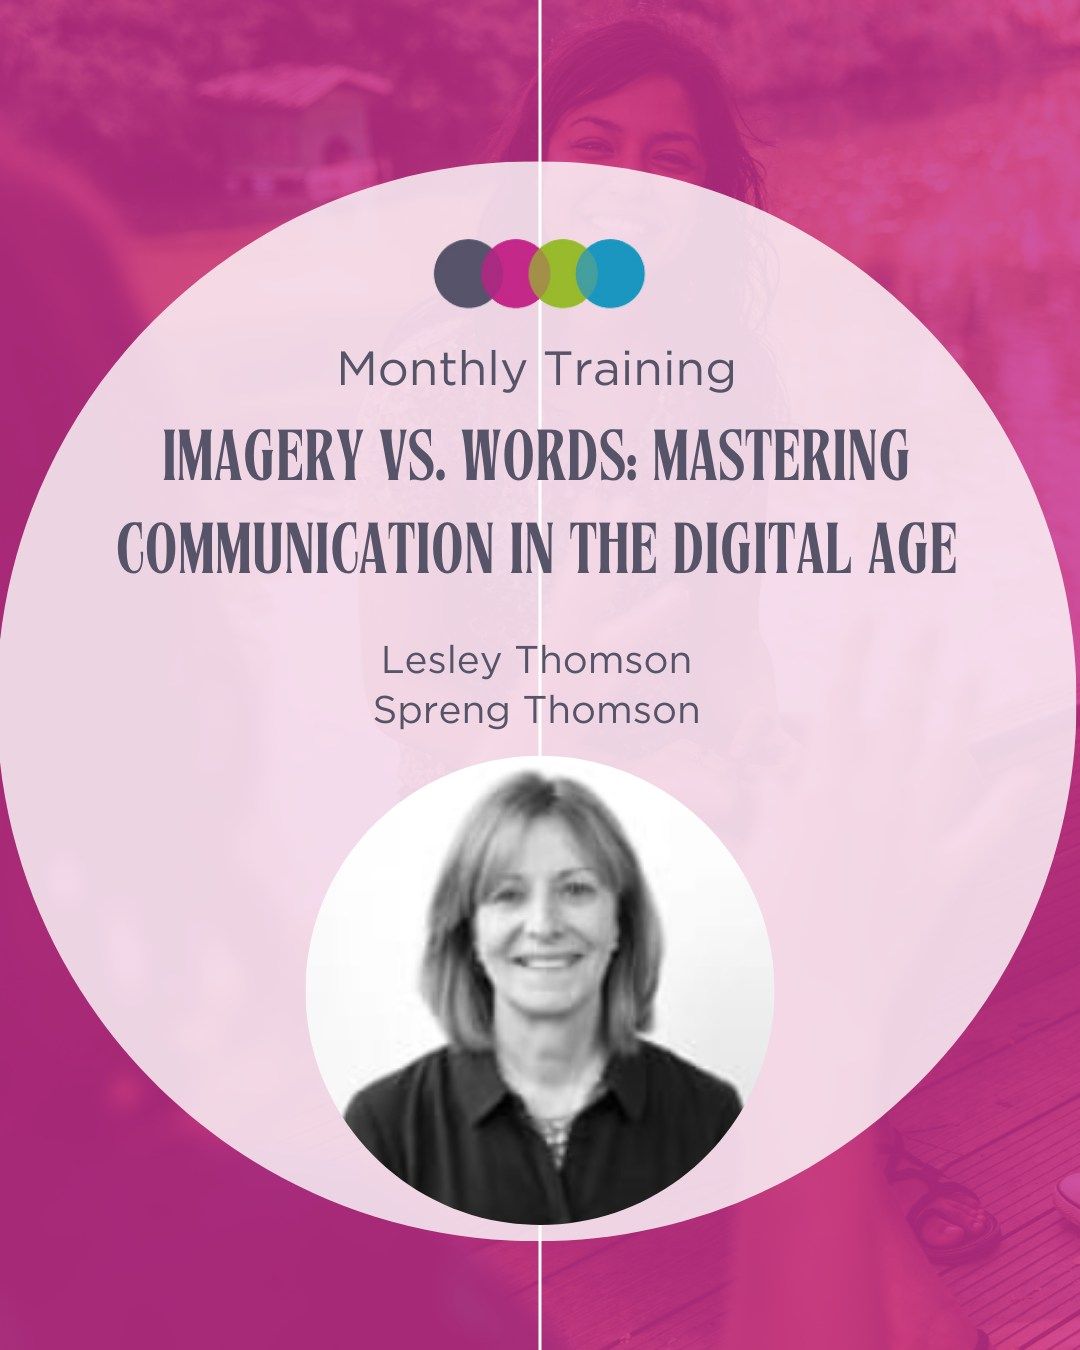 Imagery vs. Words: Mastering Communication in the Digital Age